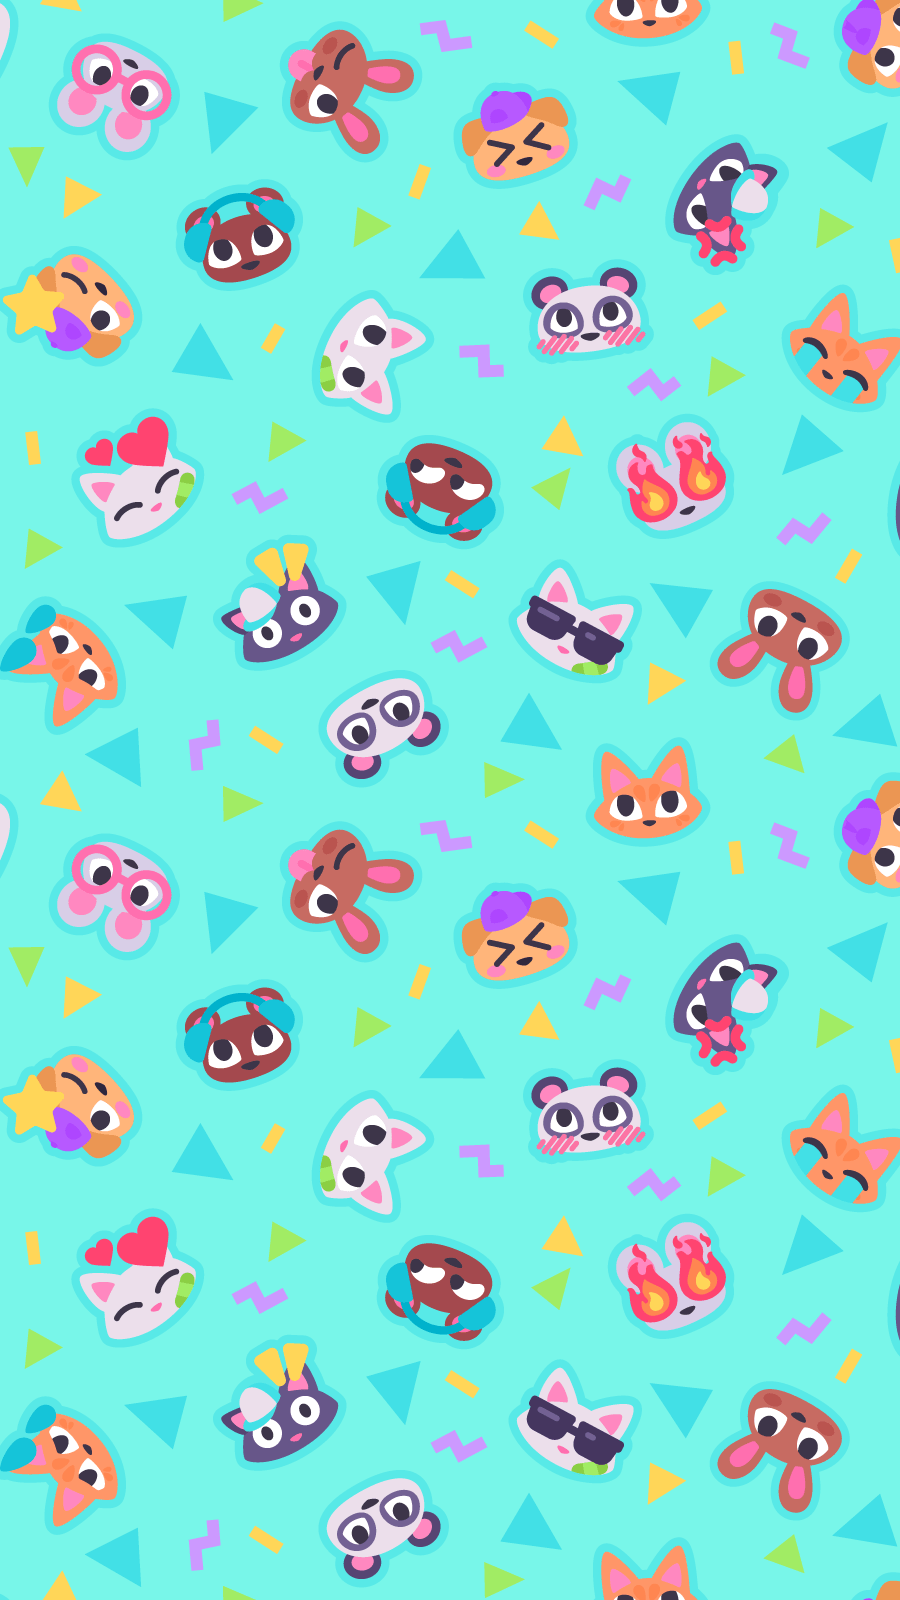 A pattern of various animal faces on blue background - Nintendo